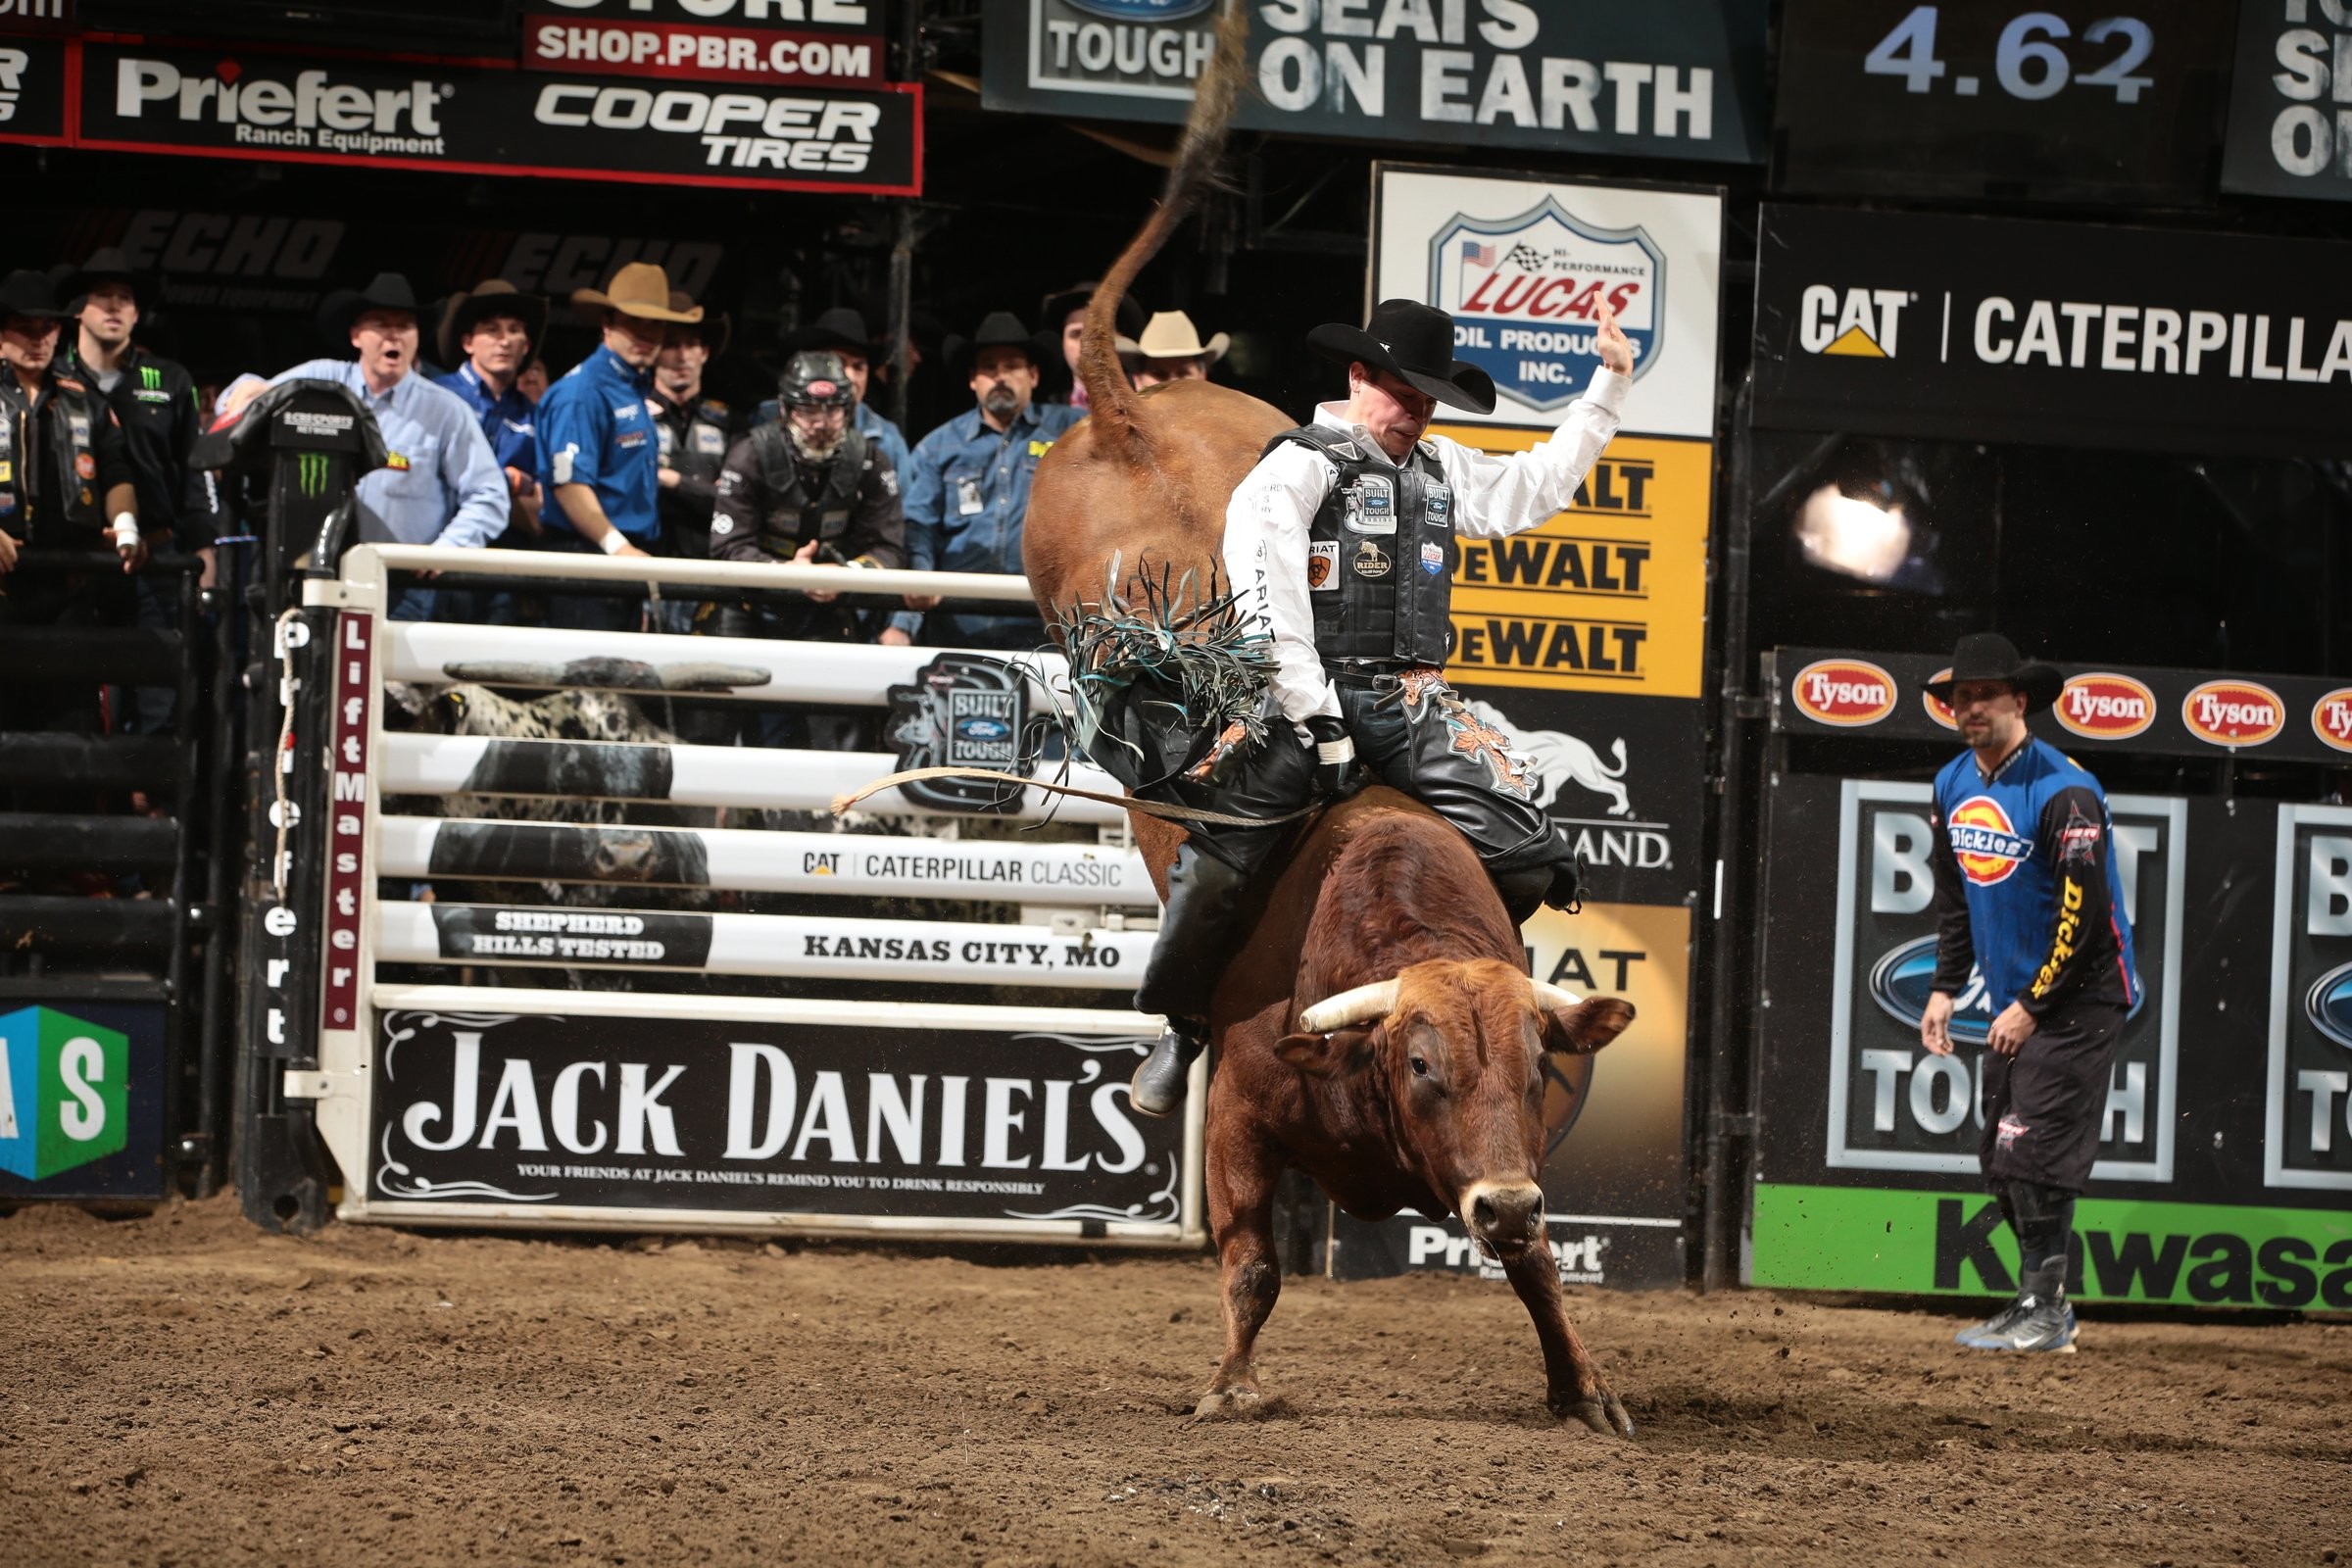 2400x1600 BULL RIDING bullrider cowboy western cow extreme rodeo d .